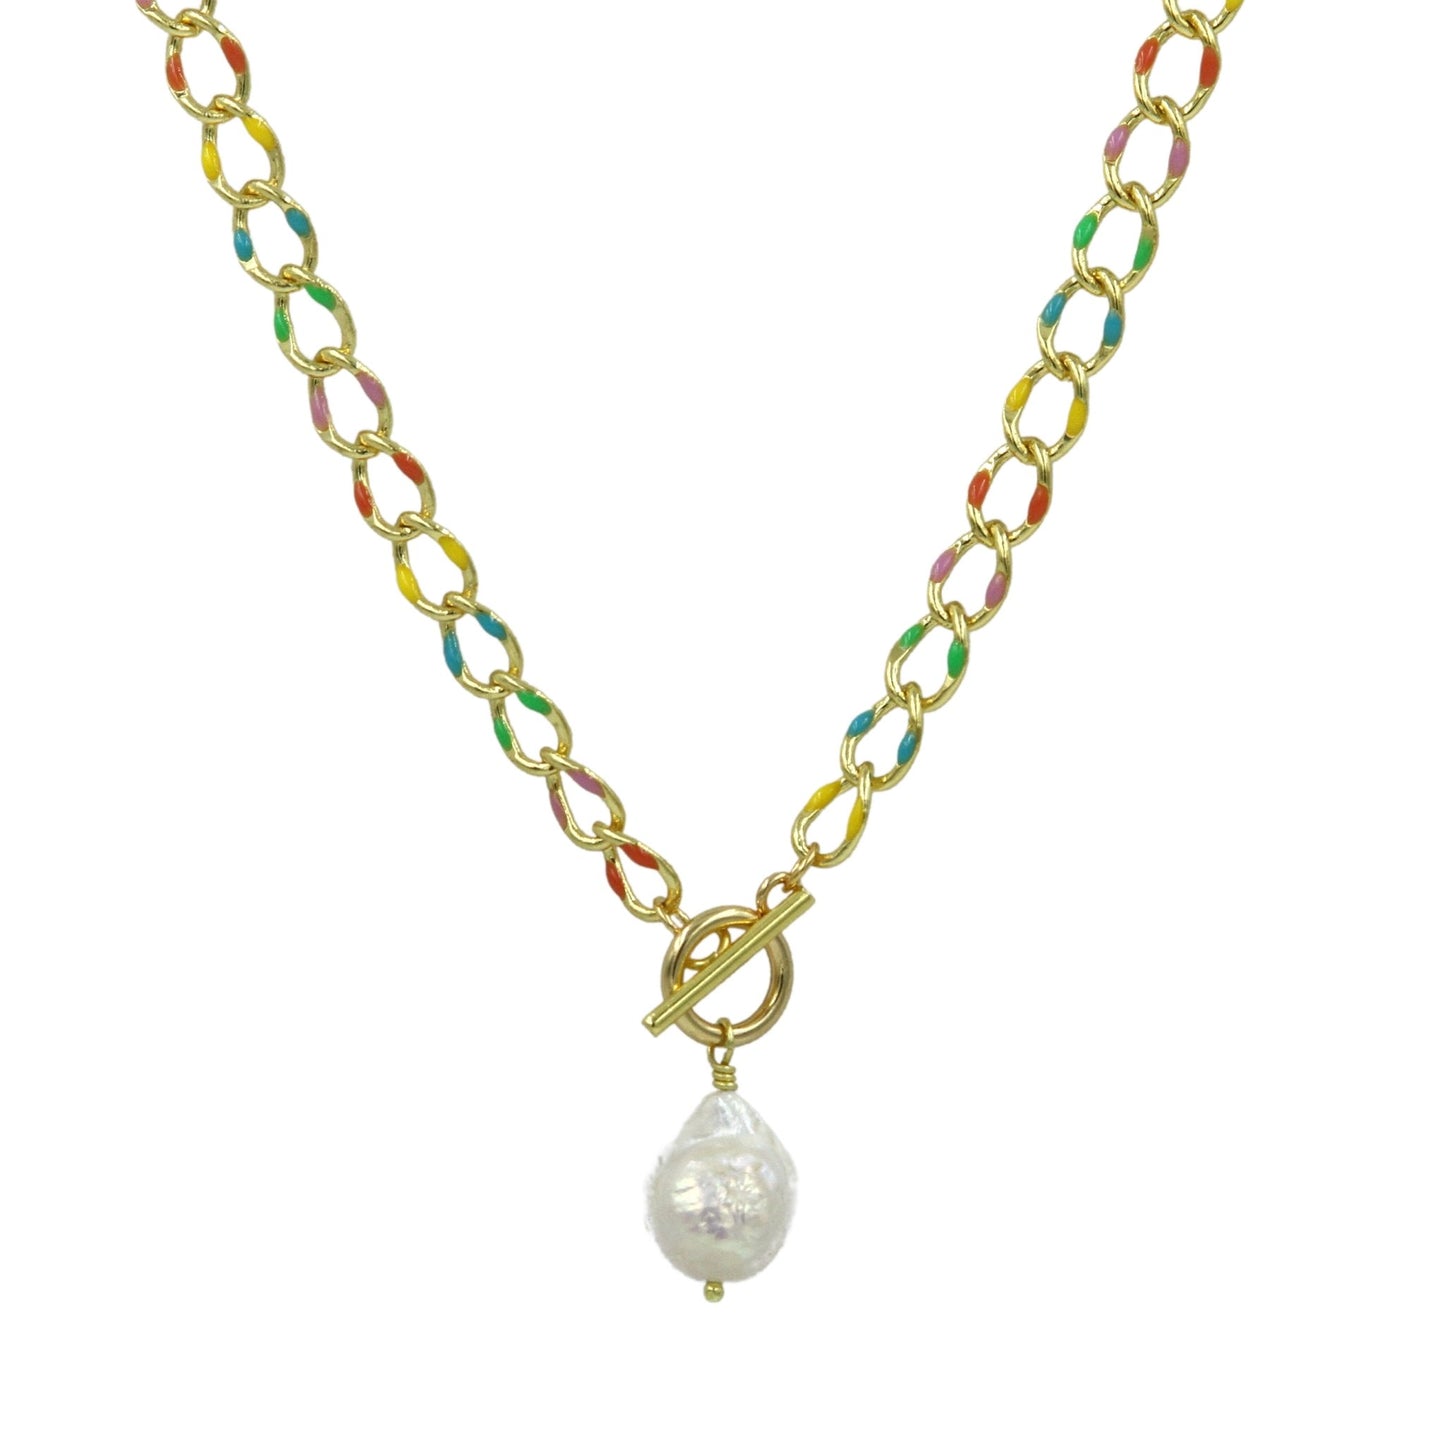 Rainbow Enamel Toggle Chain Necklace with Natural Pearl